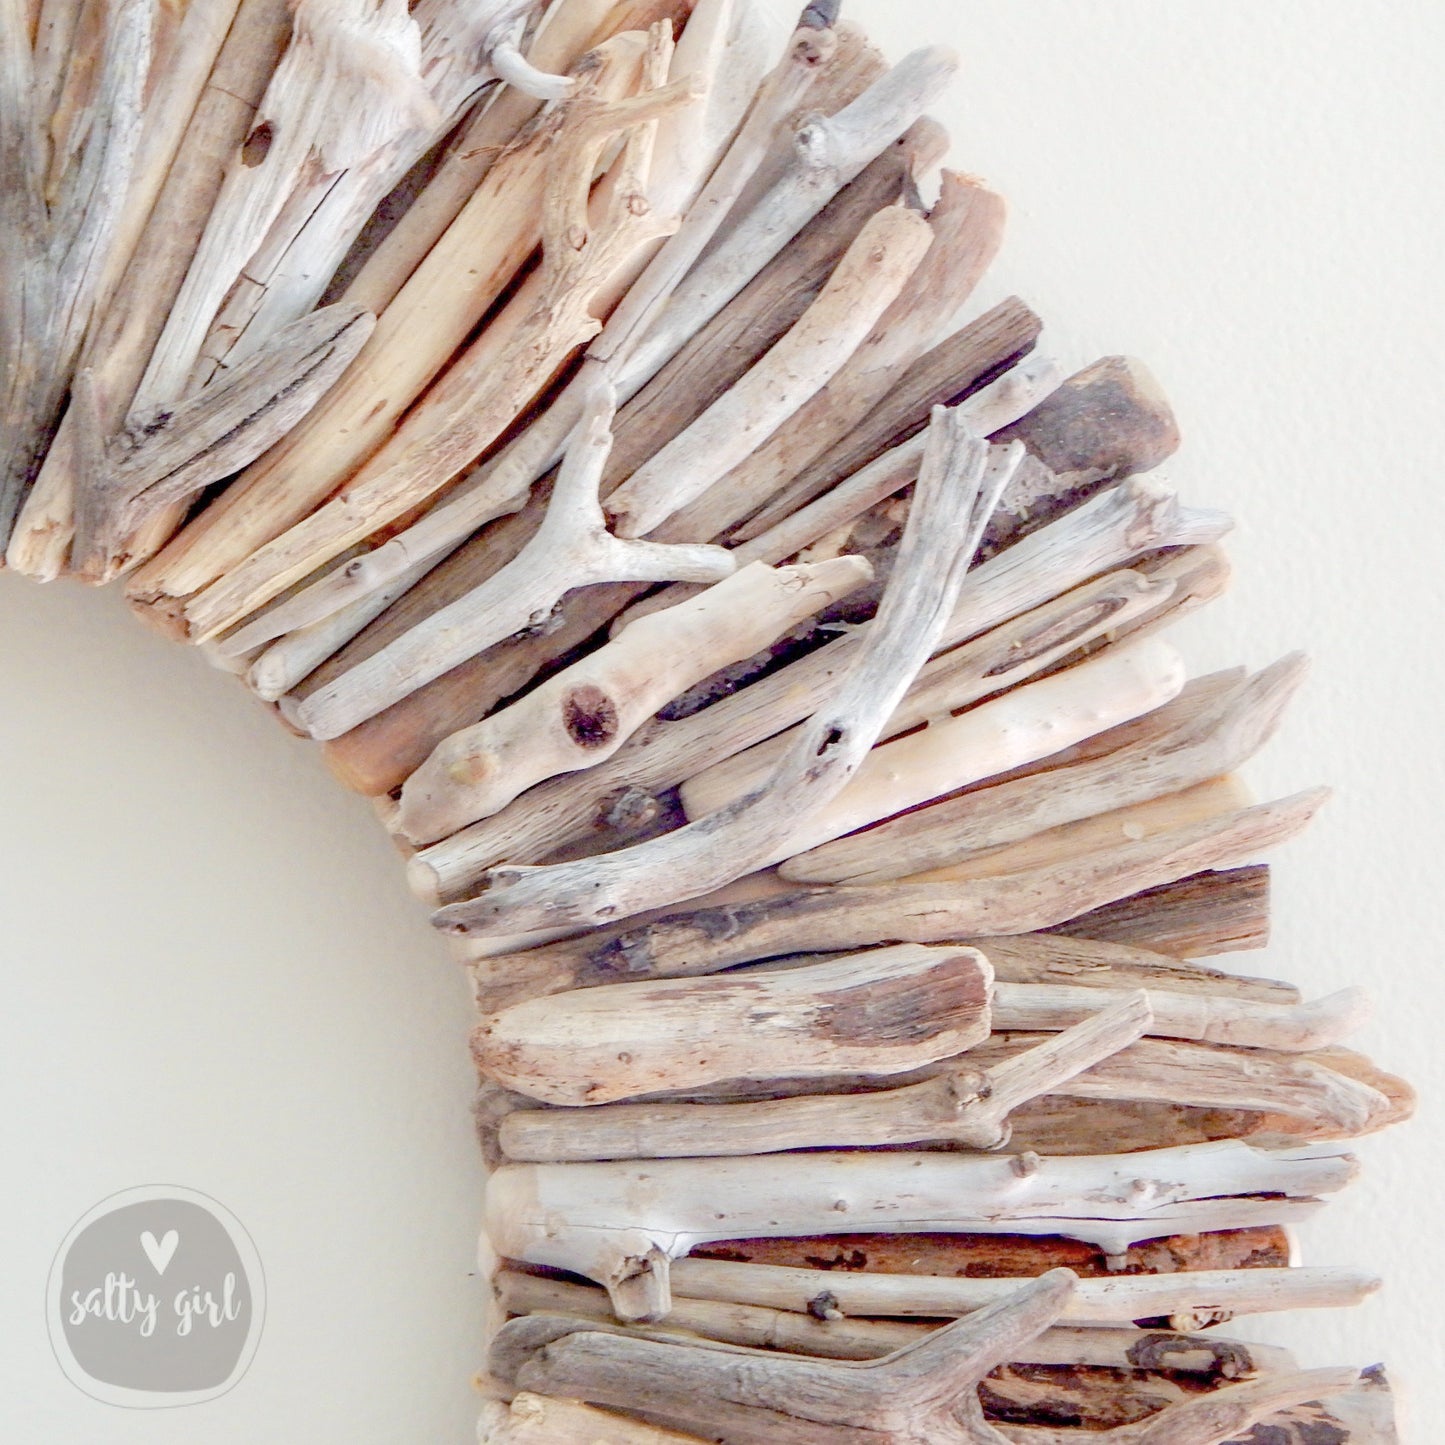 Driftwood Wreath Wall Decor with Natural Sun-Bleached Tones 30 - 42"